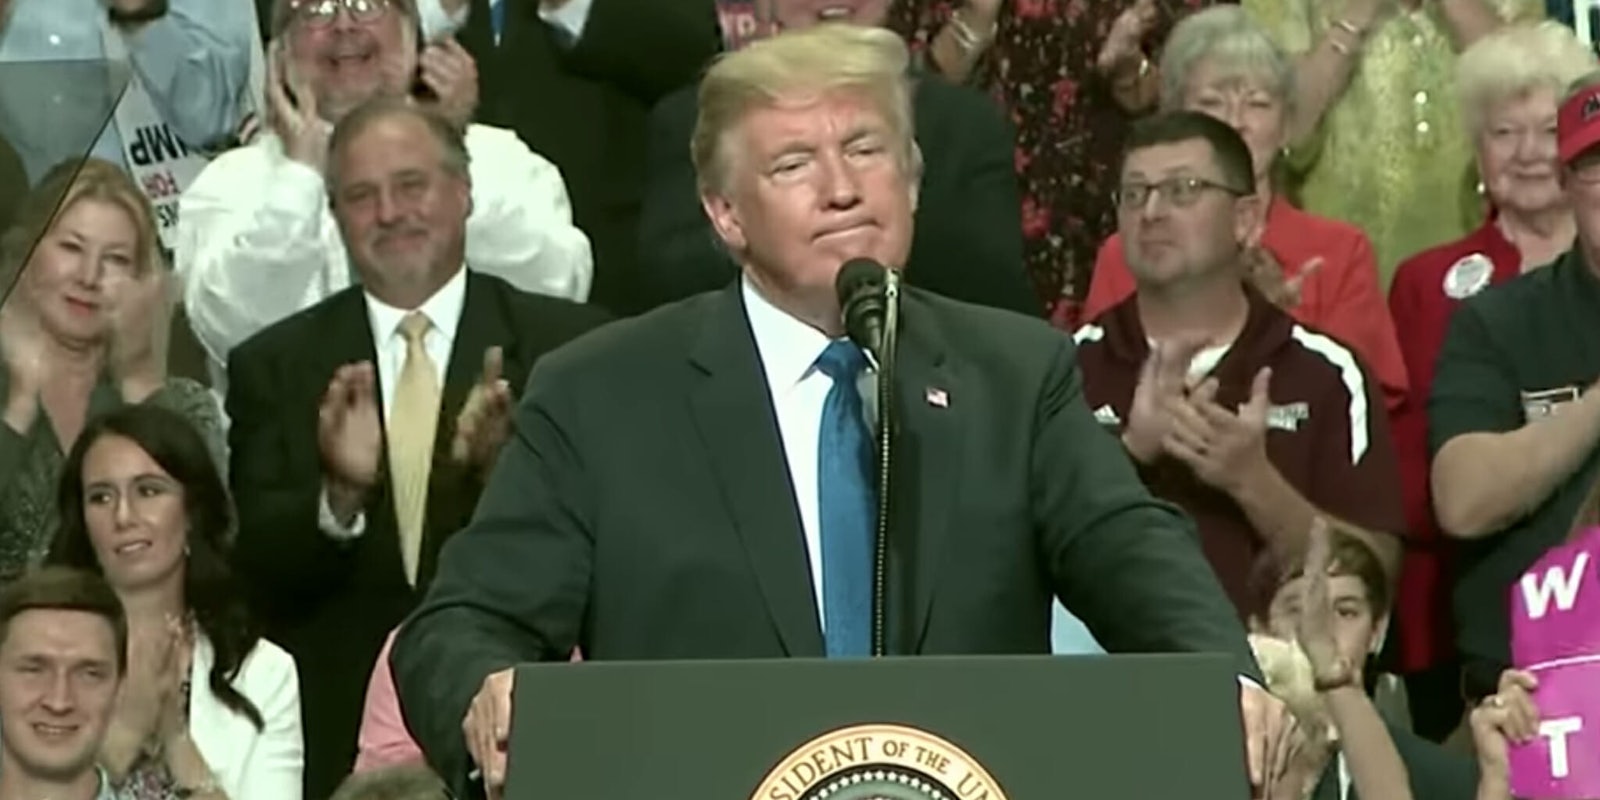 President Donald Trump mocked Christine Blasey Ford at a rally in Mississippi.